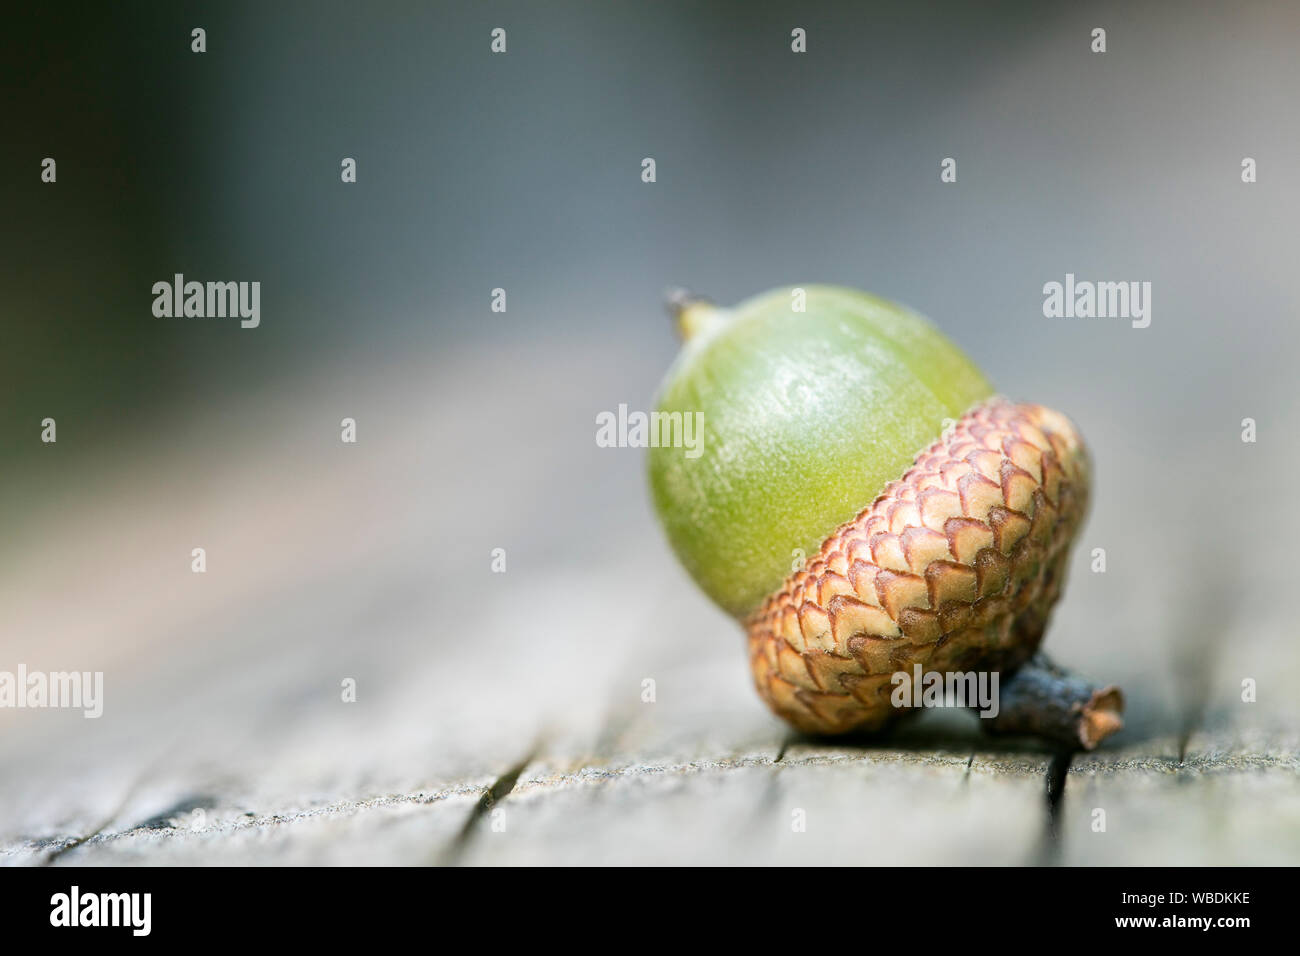 Wild fruits close up fifty megapixels quercus robur family fagaceae ice age mania high quality Stock Photo